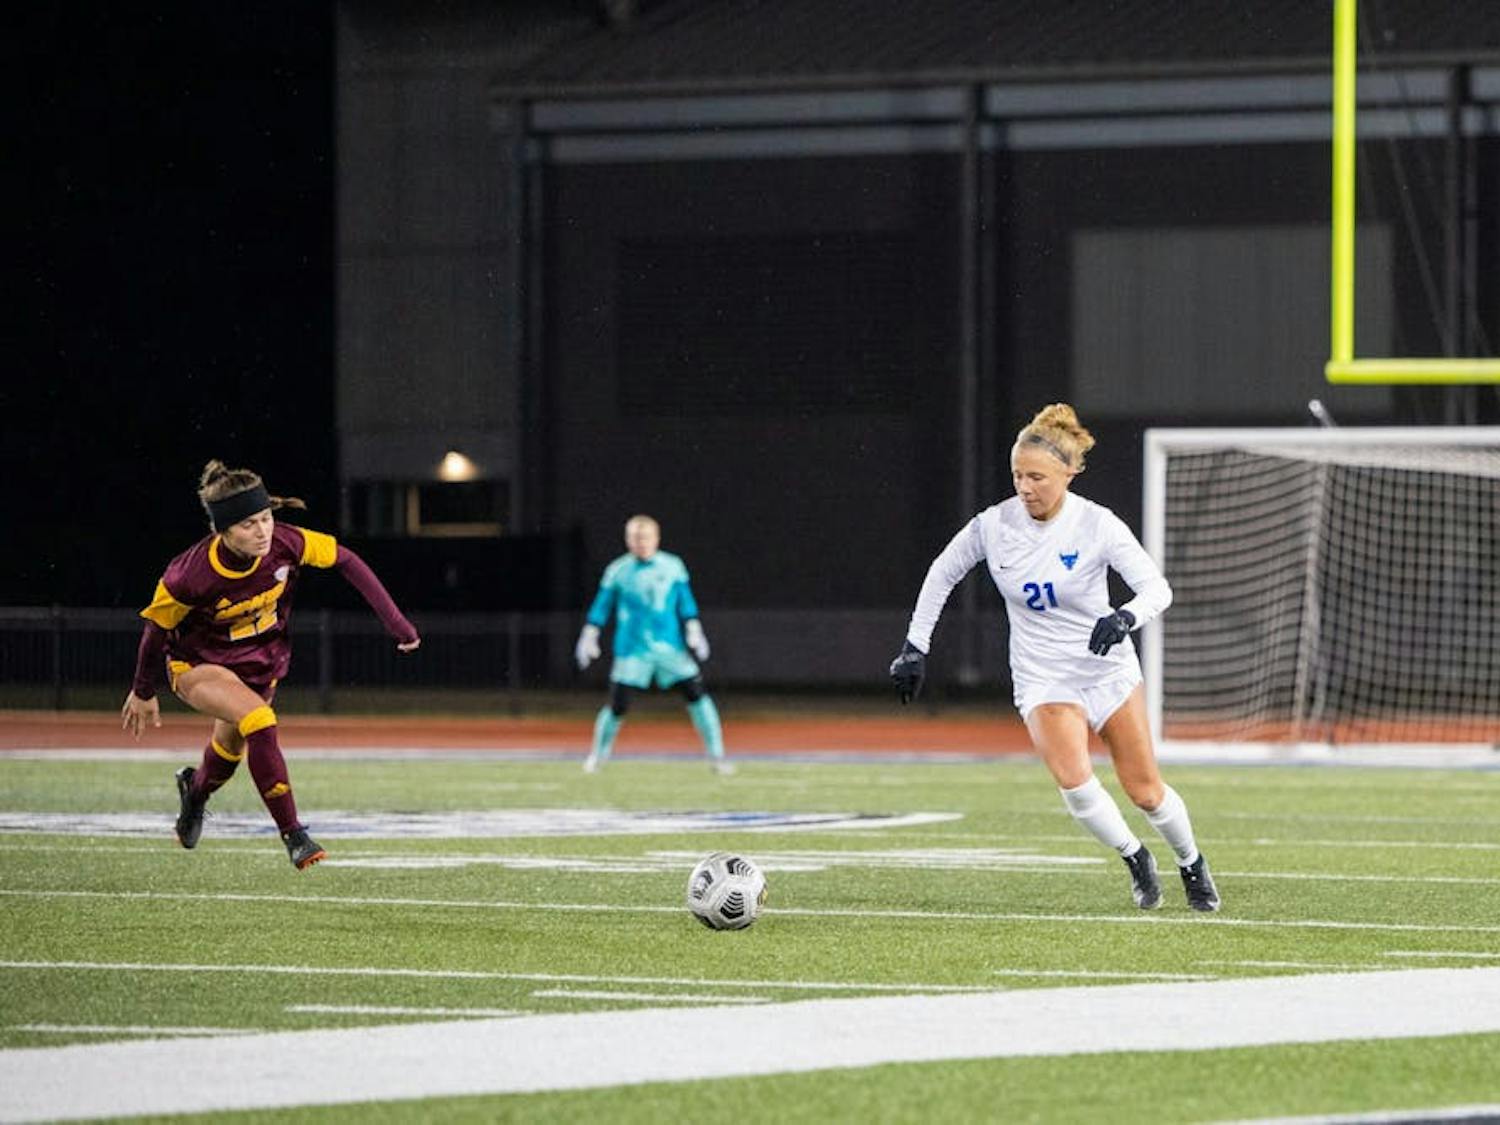 UB women's soccer is now 1-1 in the spring season.